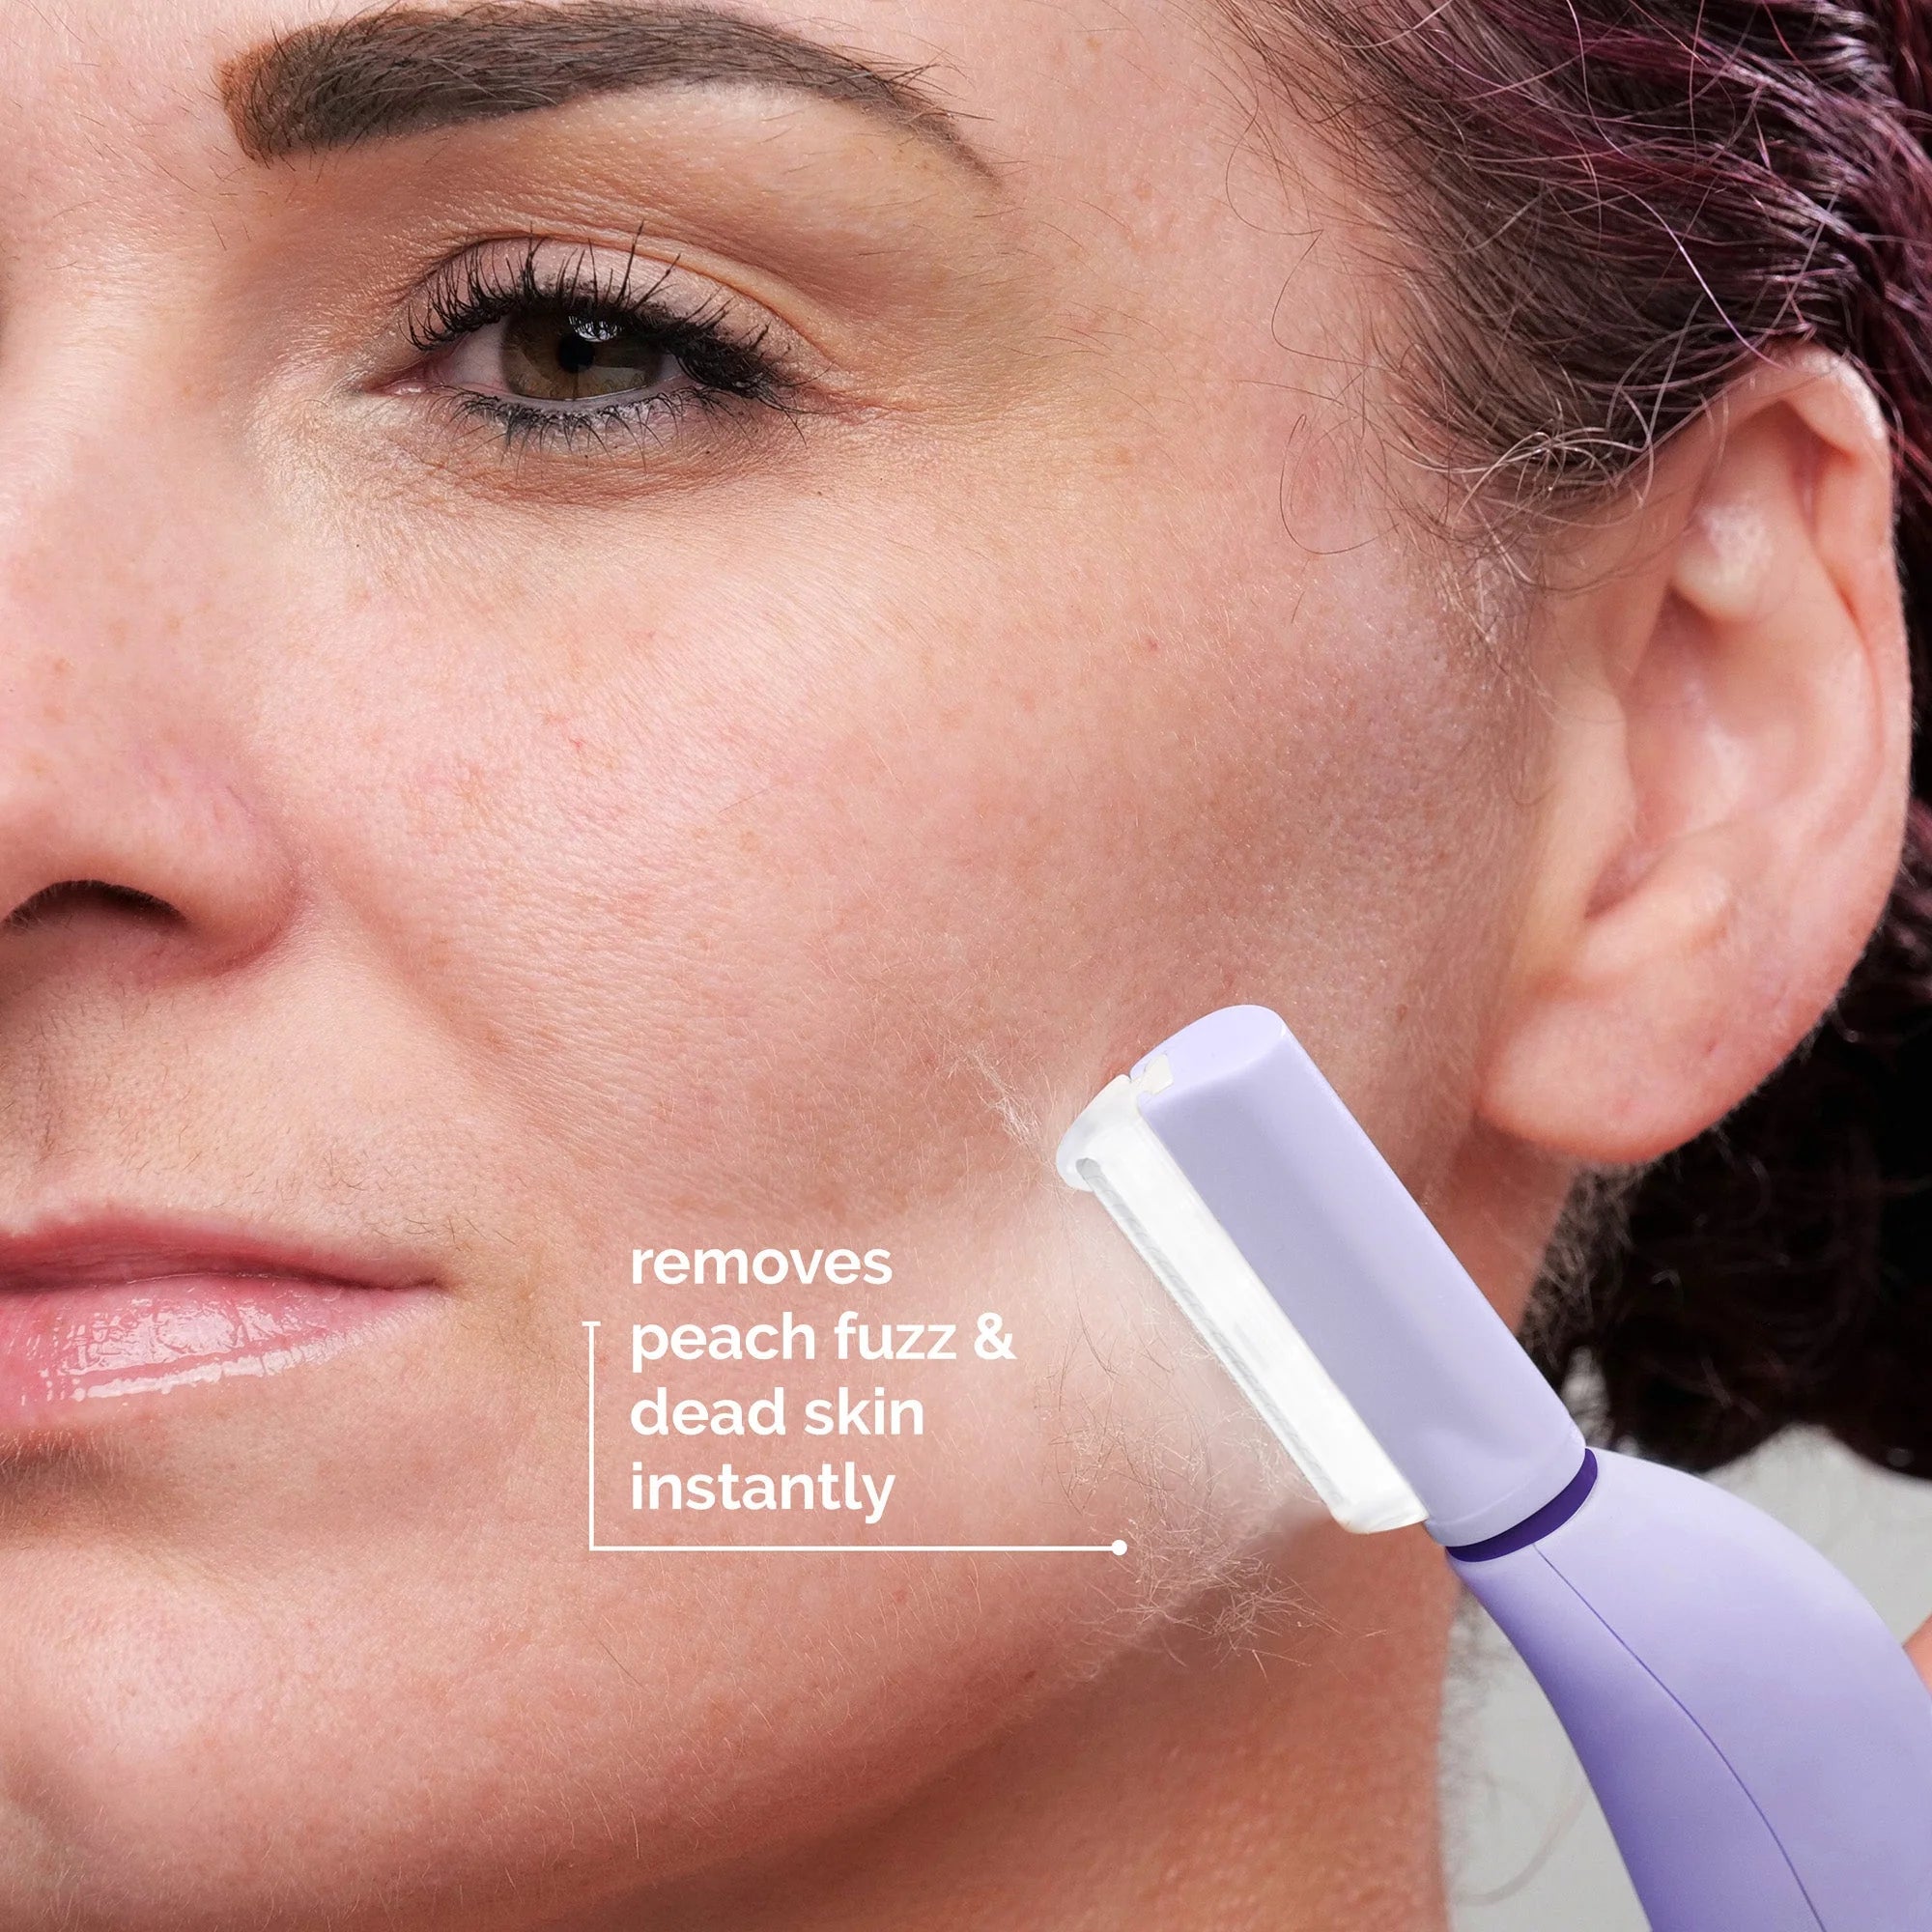 White - Close-up of a person's face as they use the Michael Todd Beauty Sonicsmooth Pro+, a small handheld device for sonic dermaplaning that instantly removes peach fuzz and dead skin with painless exfoliation.